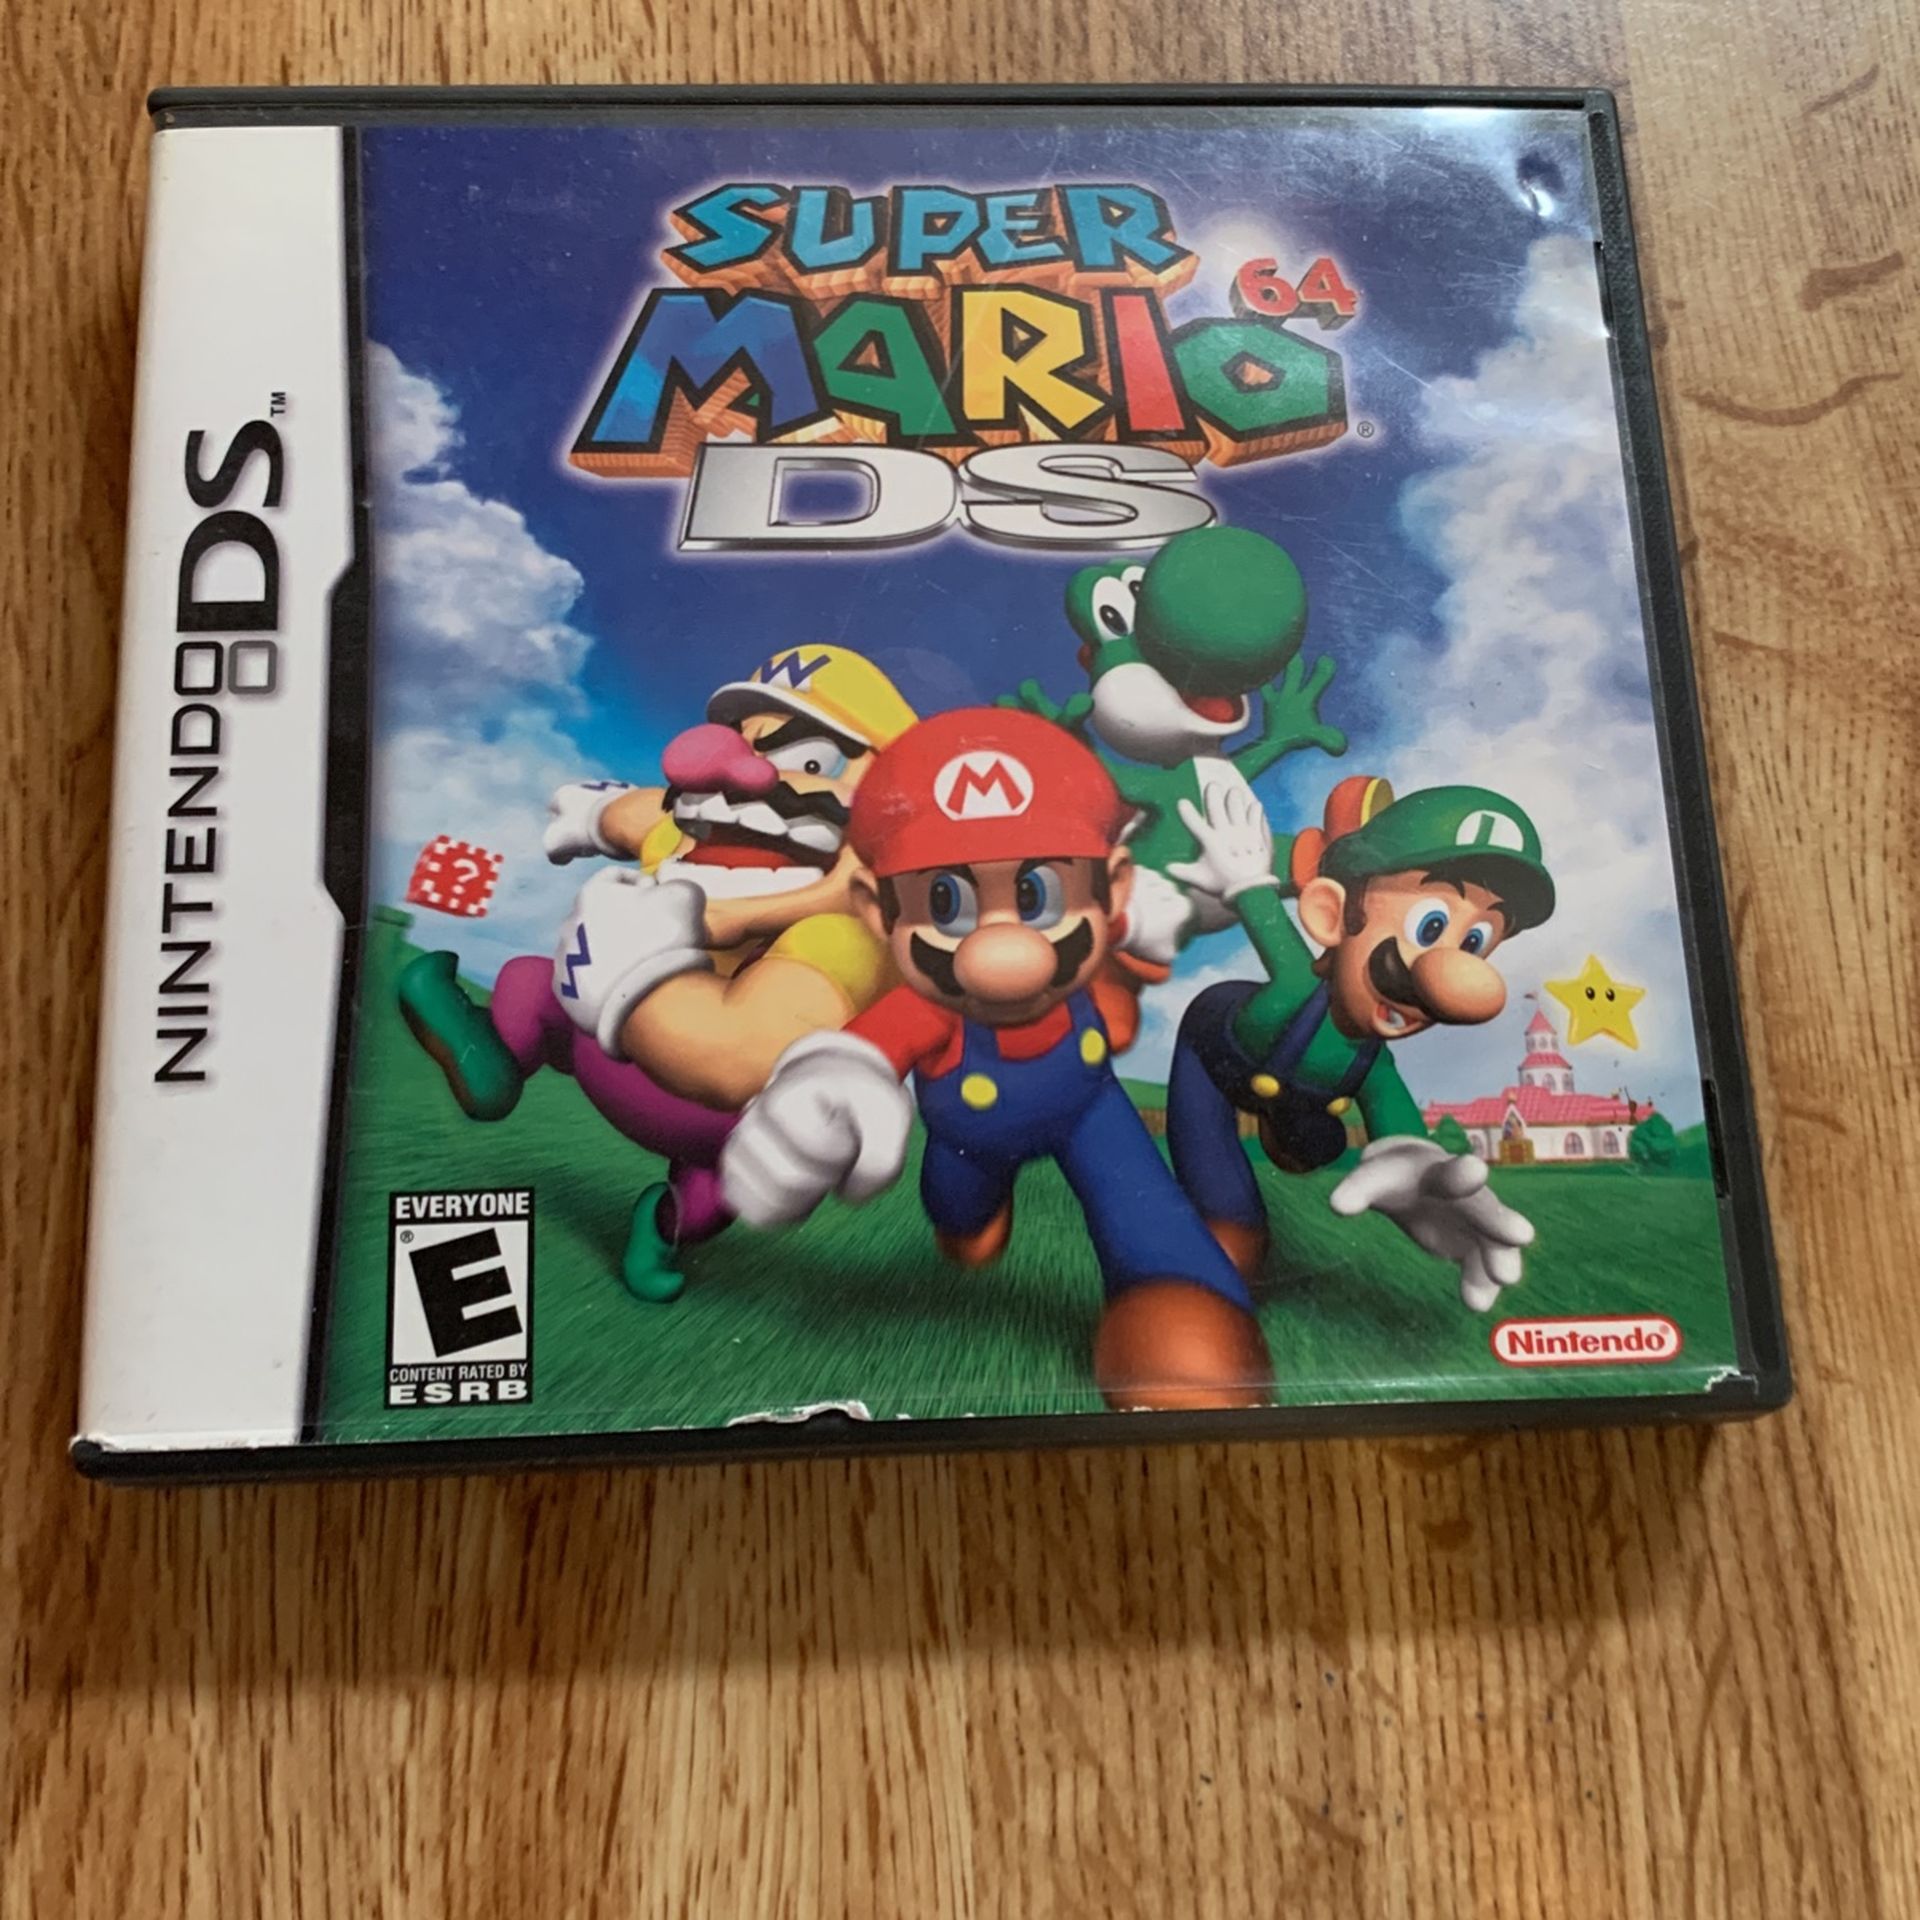 Super Mario 64 DS (Nintendo DS, 2004)complete With Manual 